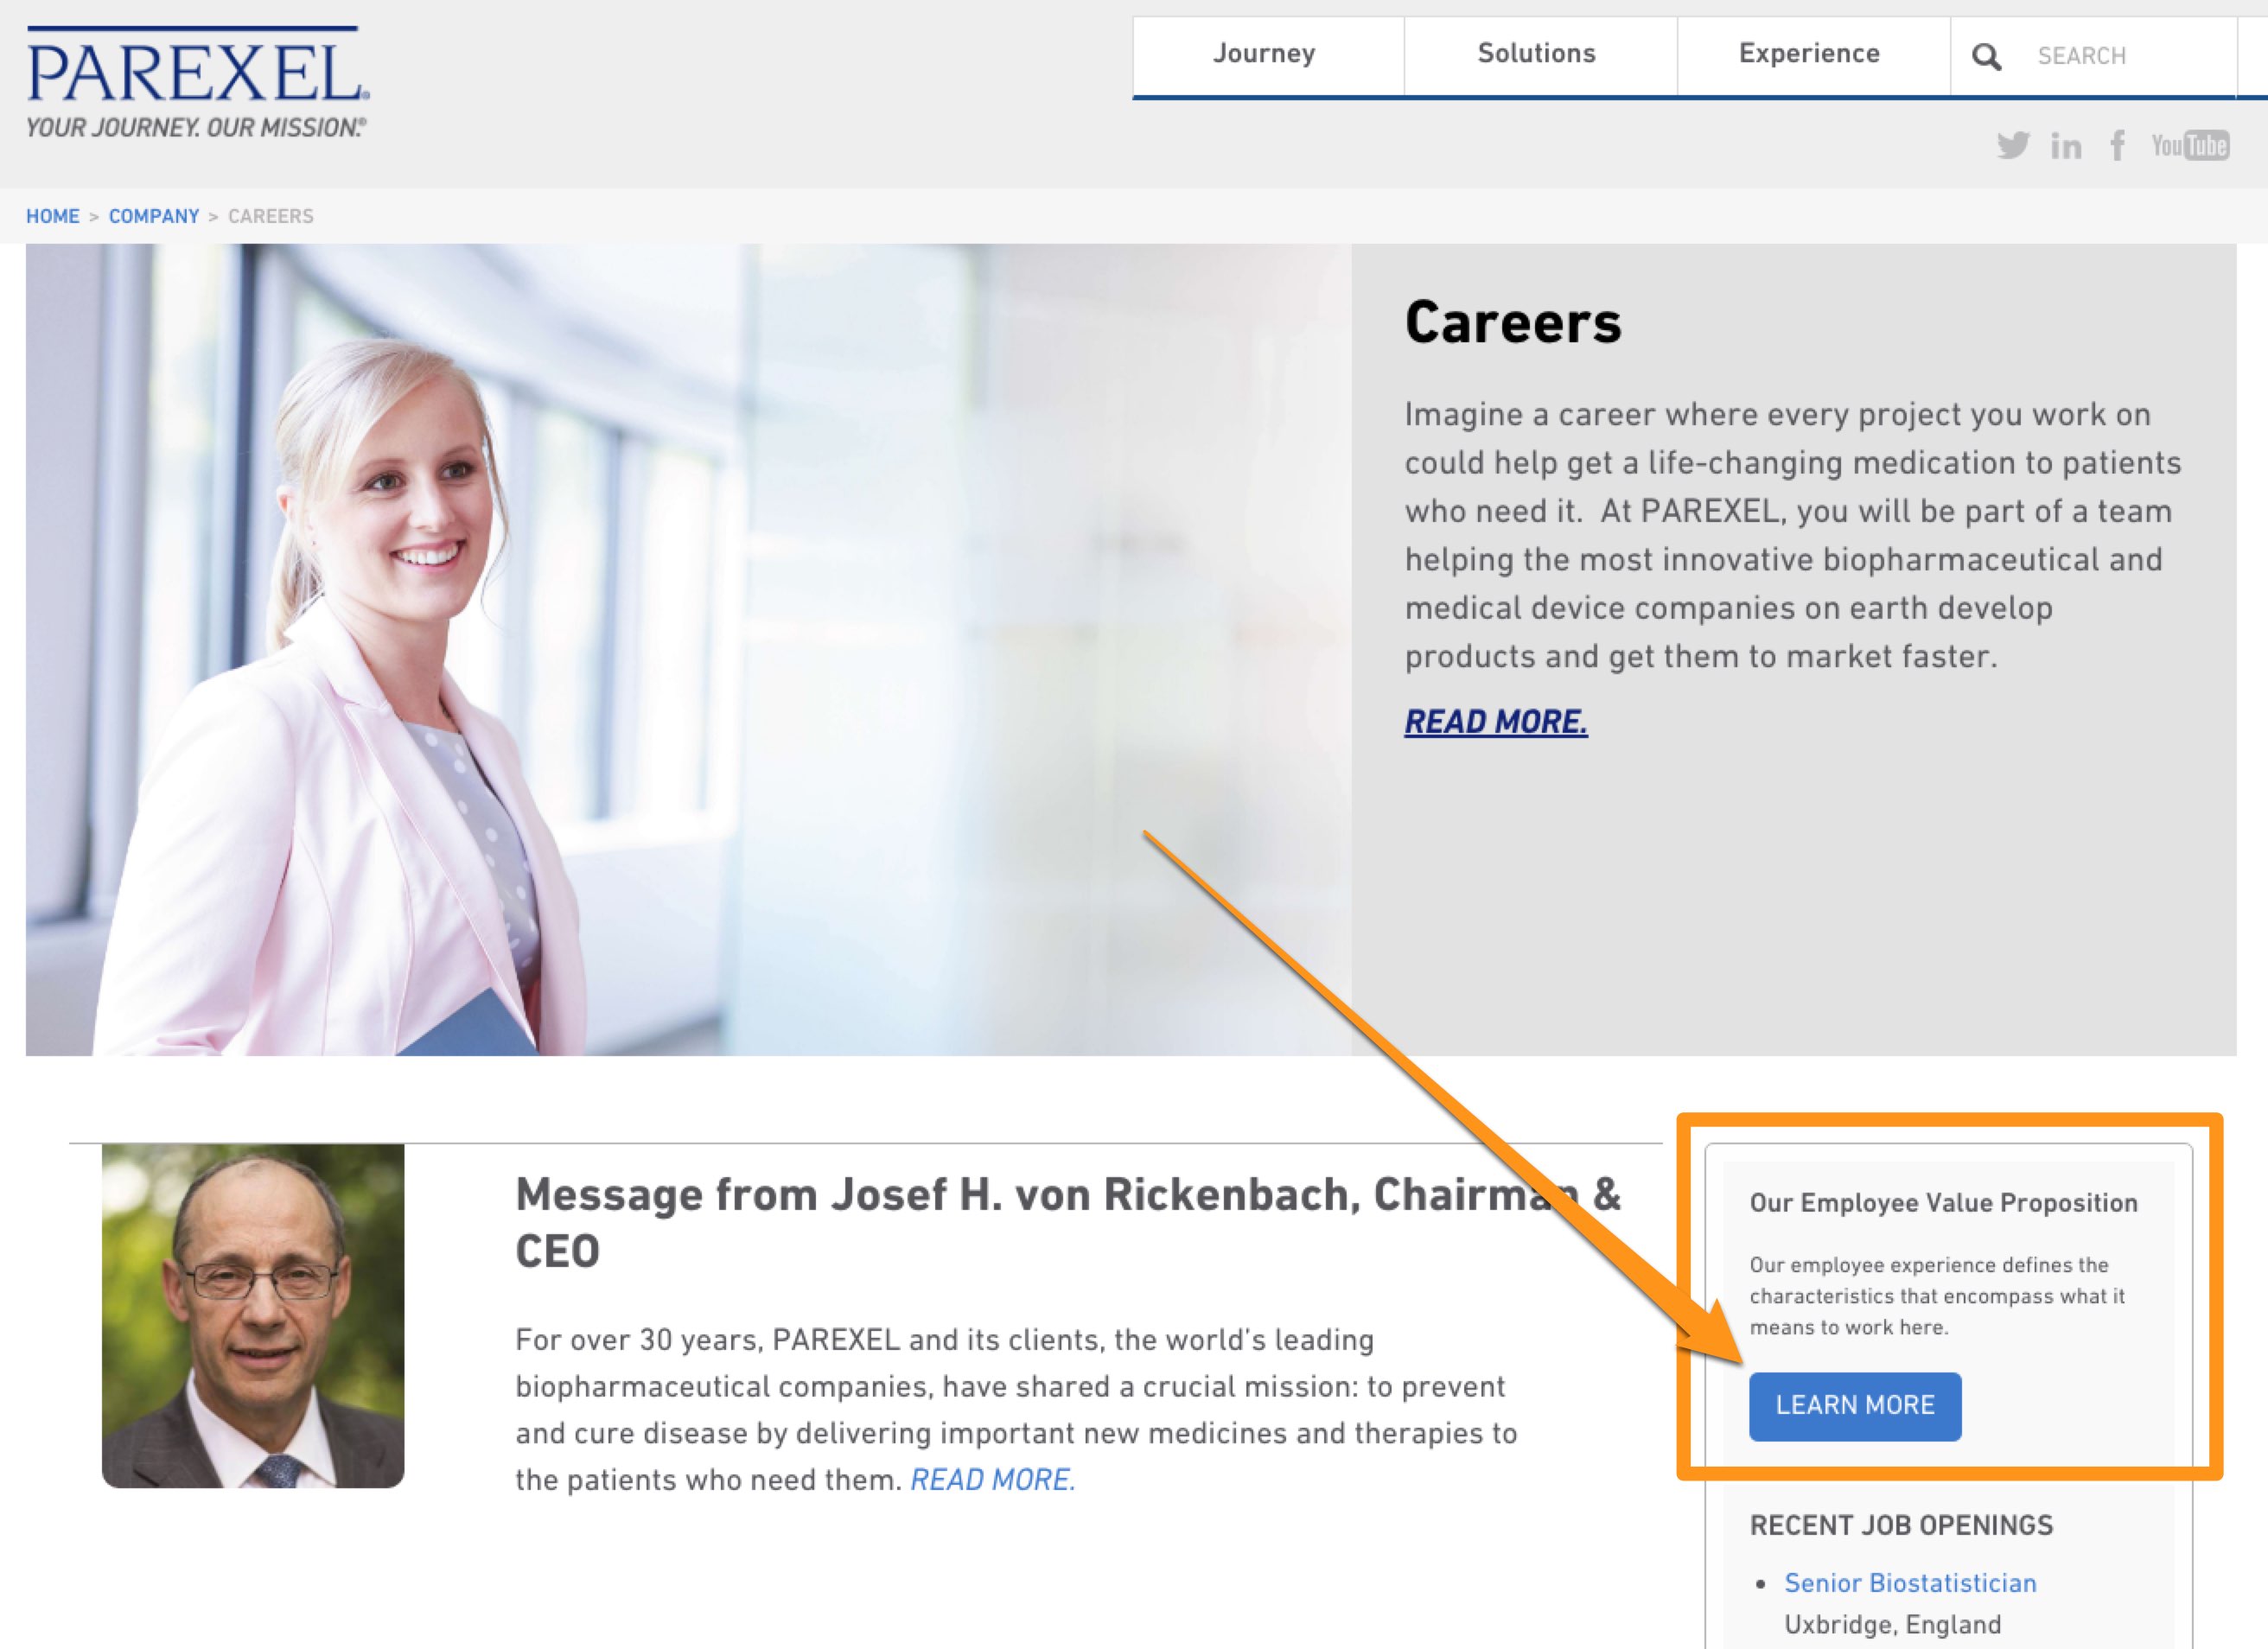 employee-value-proposition-evp-on-company-career-page-job-search